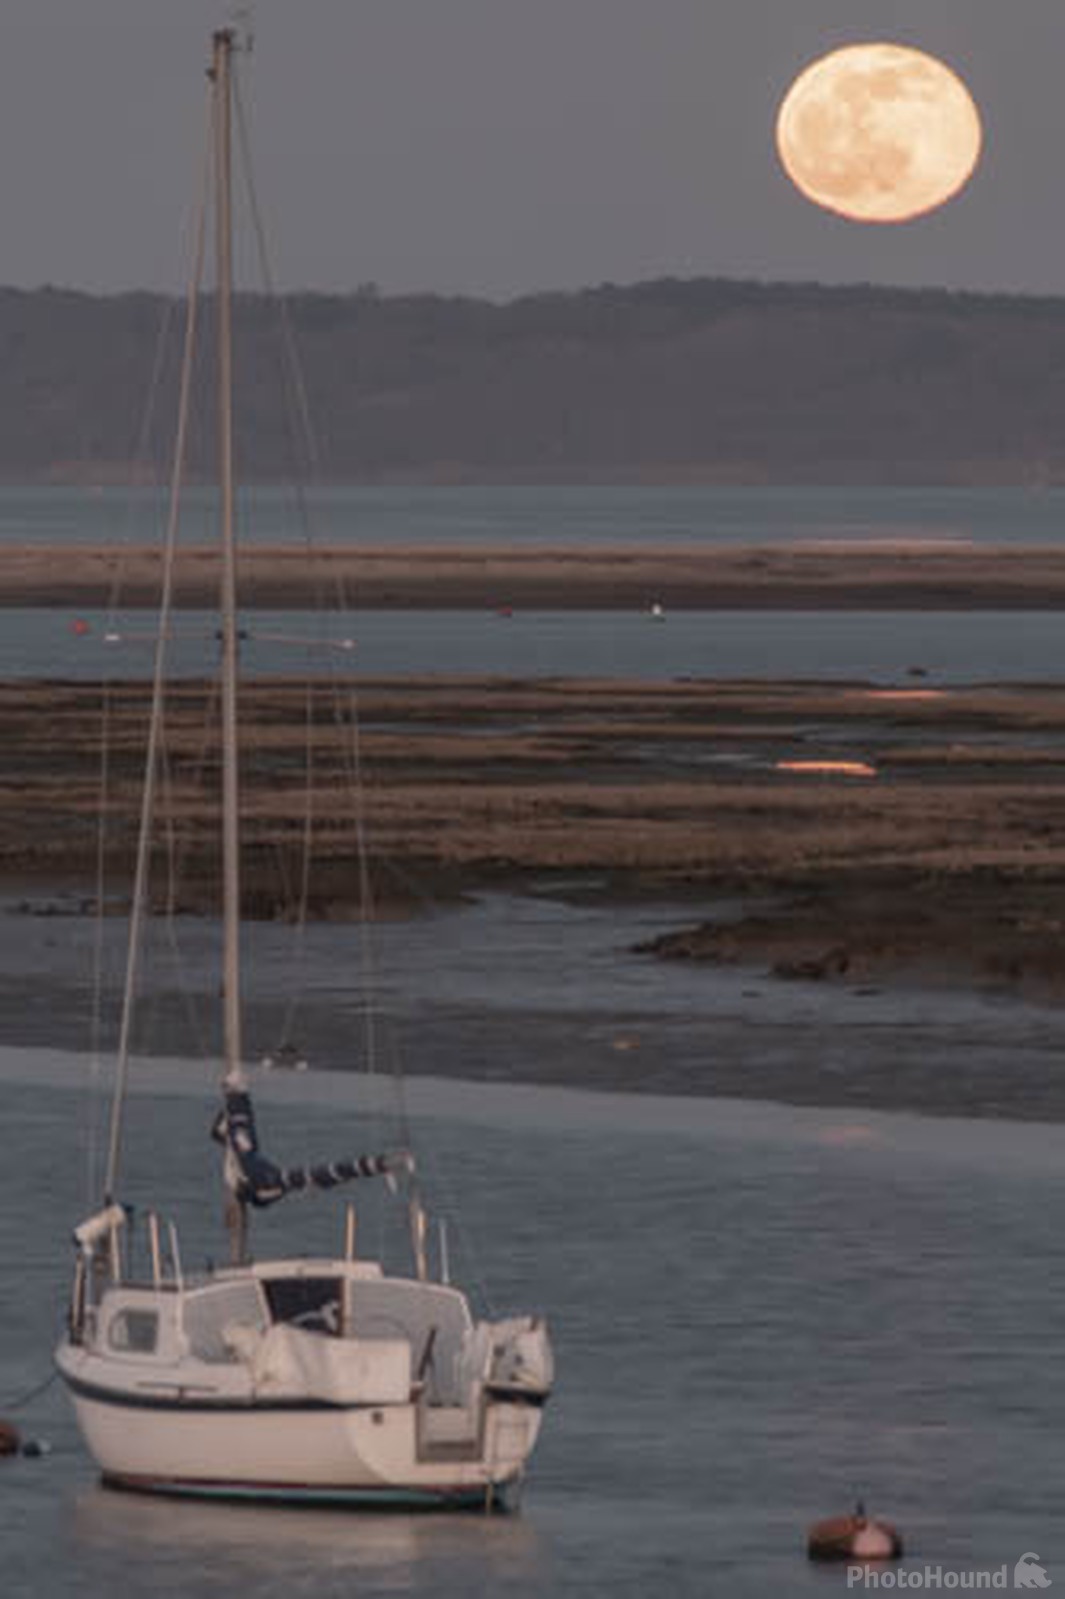 Image of Lymington and Keyhaven Nature Reserve by michael bennett